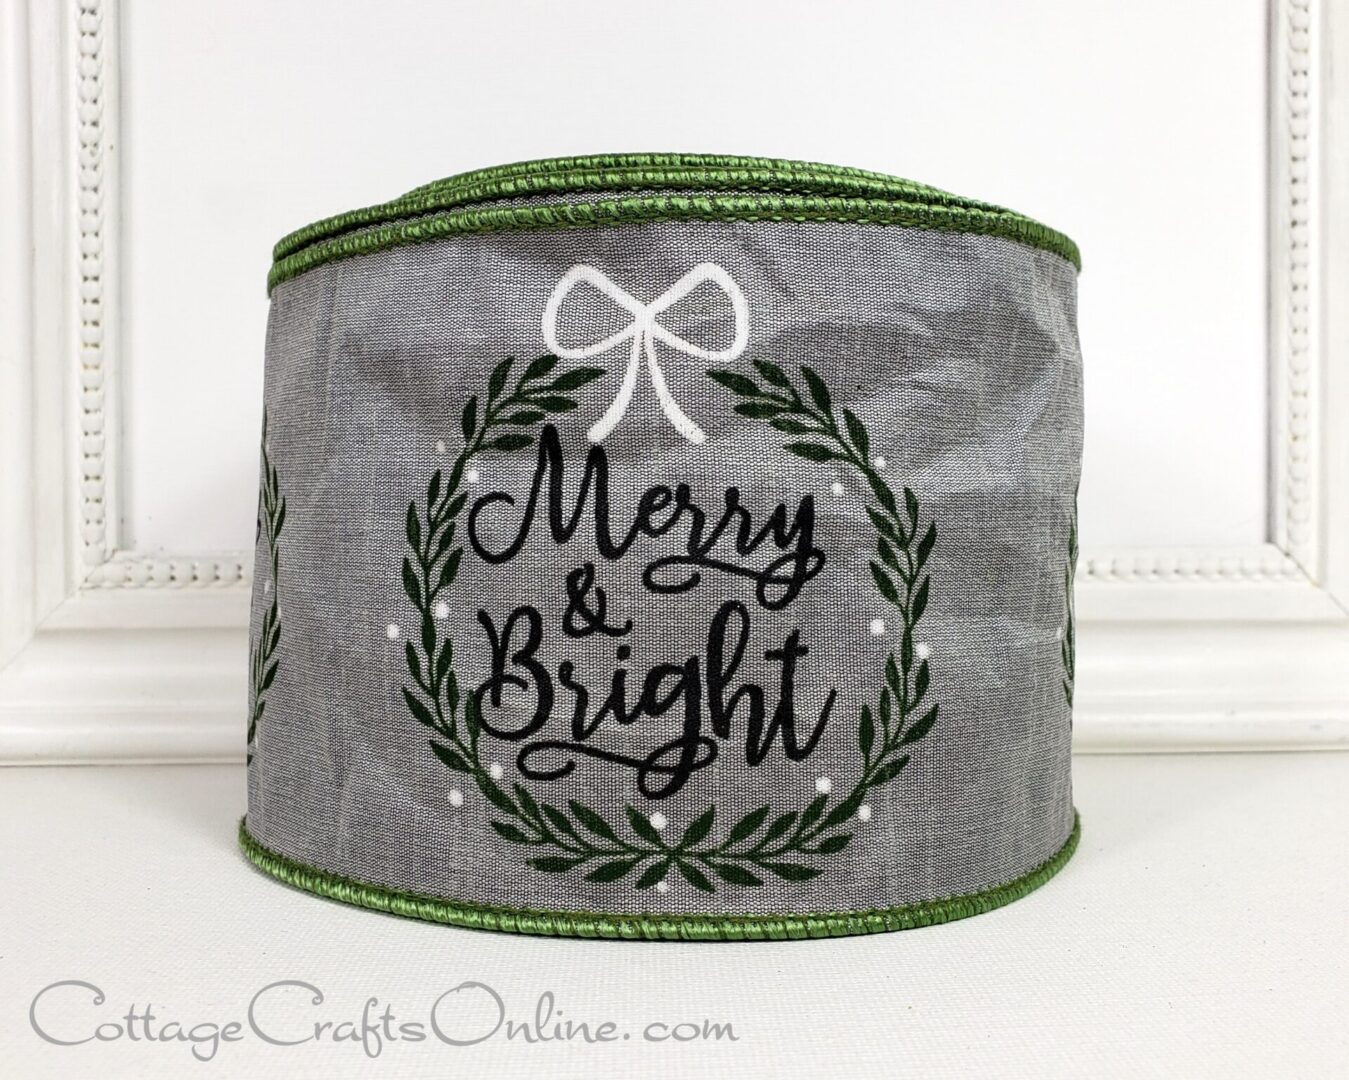 A close up of the merry and bright ribbon